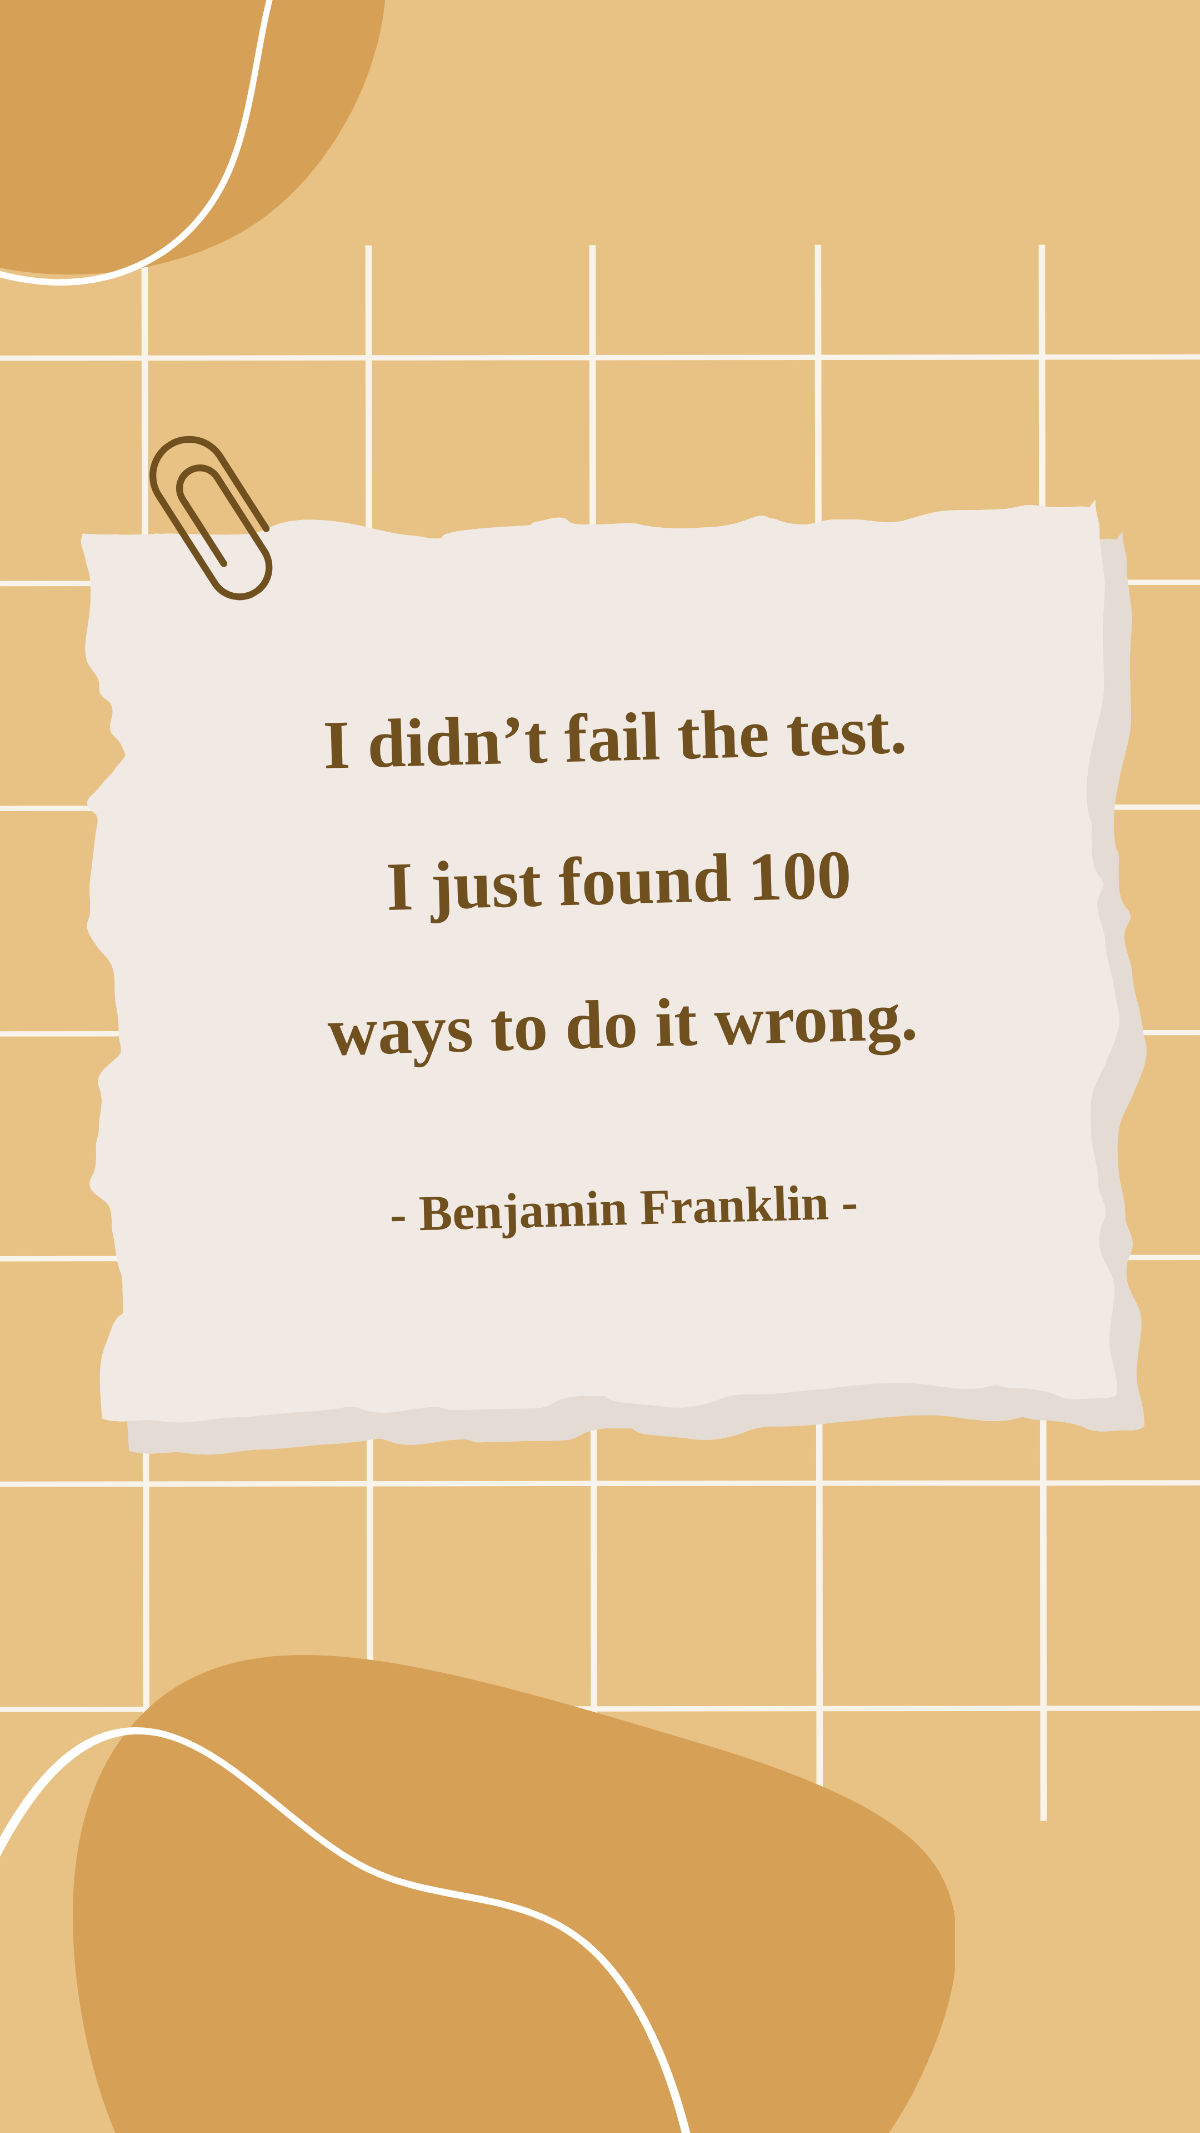 Benjamin Franklin - I didn’t fail the test. I just found 100 ways to do it wrong. Template